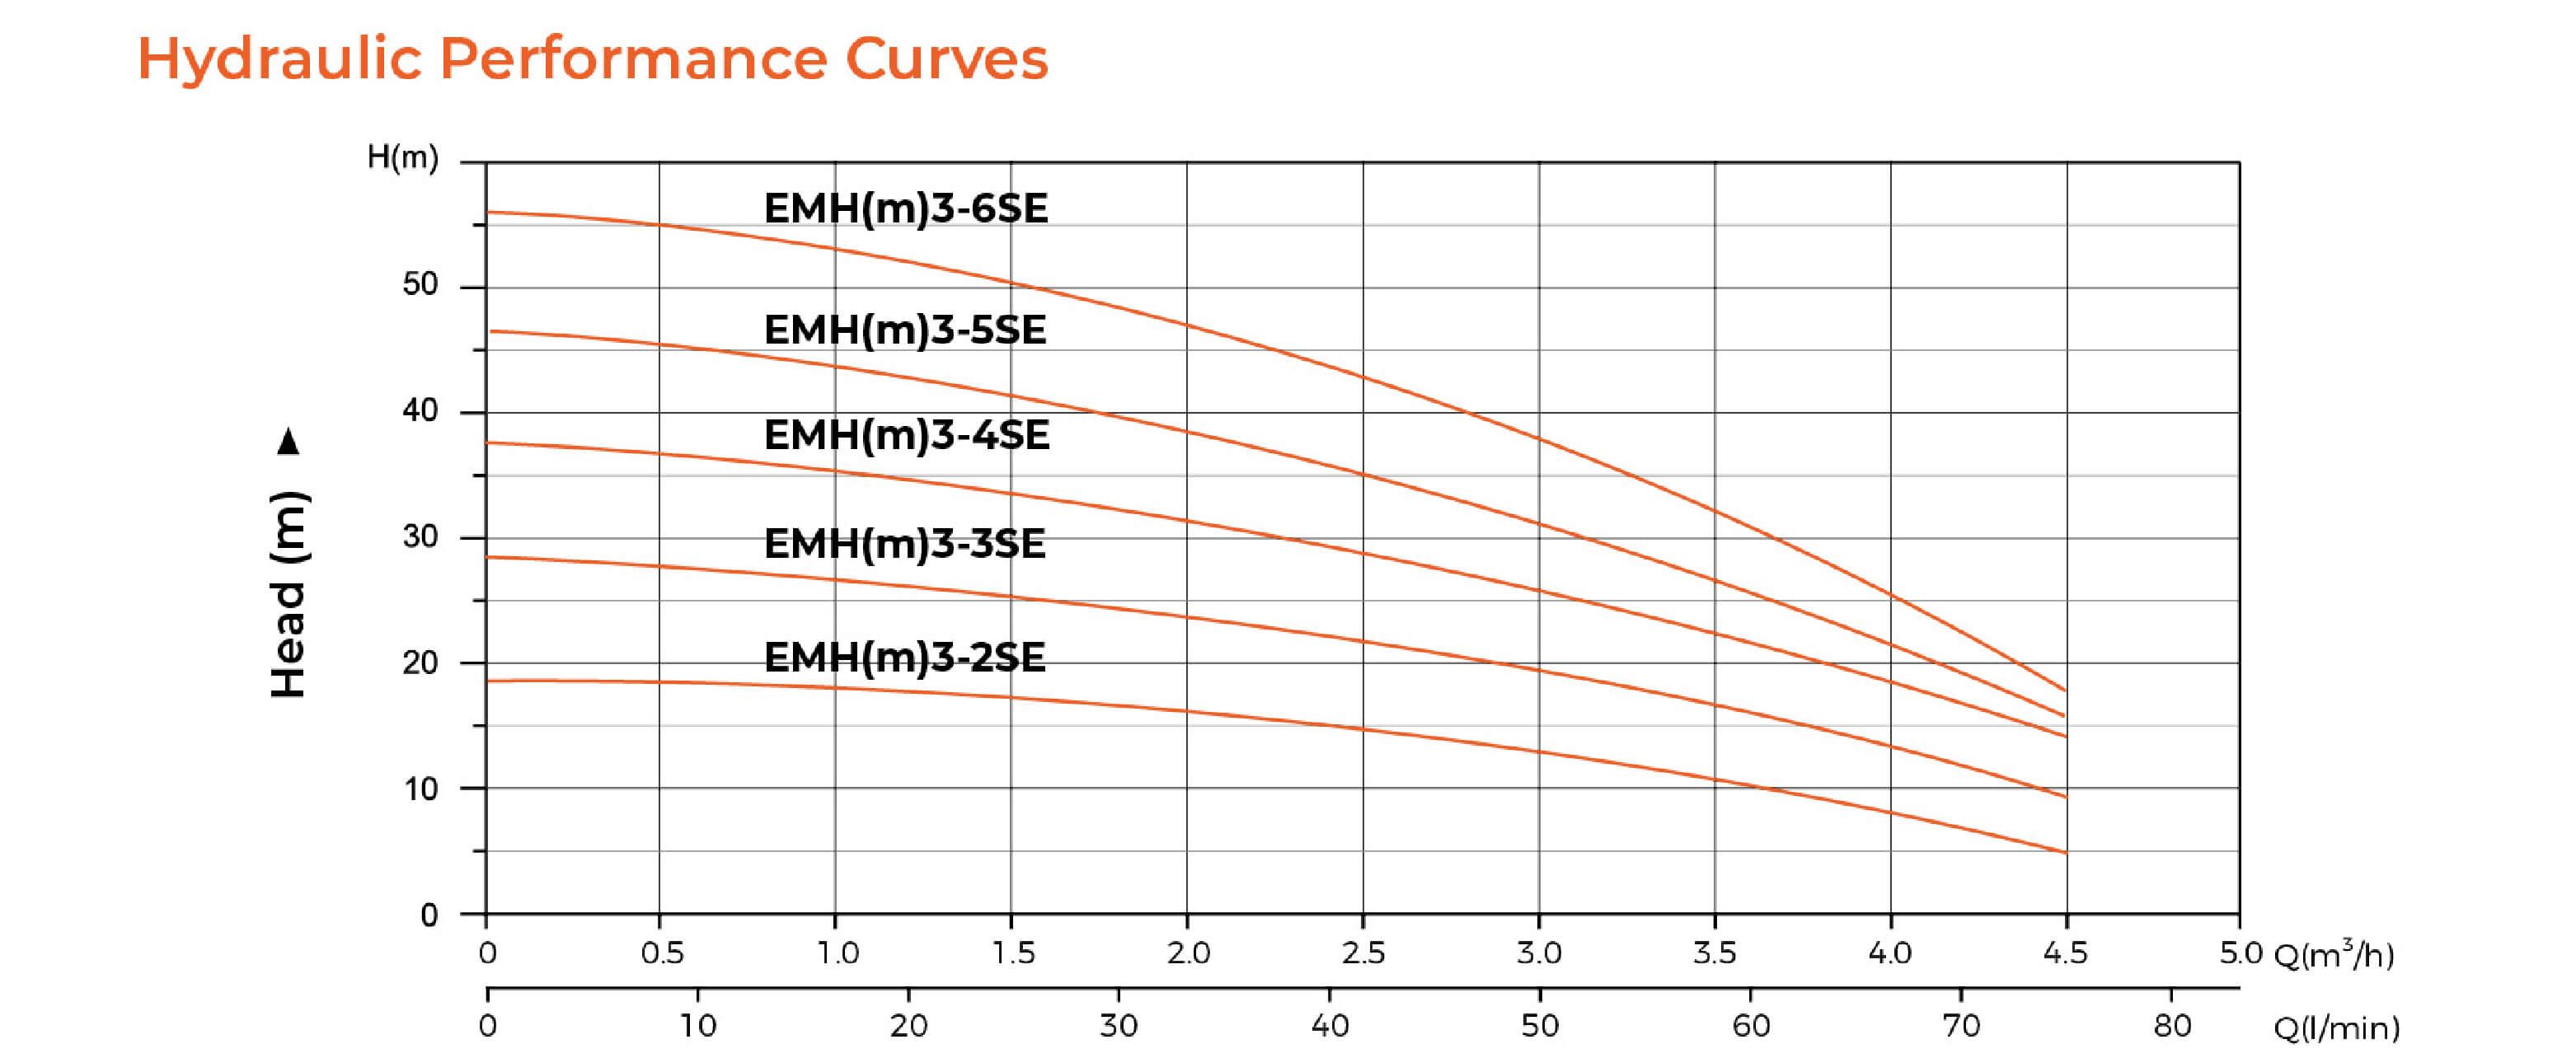 EMHm3-SE Stainless Steel Horizontal Multistage Pump Hydraulic Performance Curves